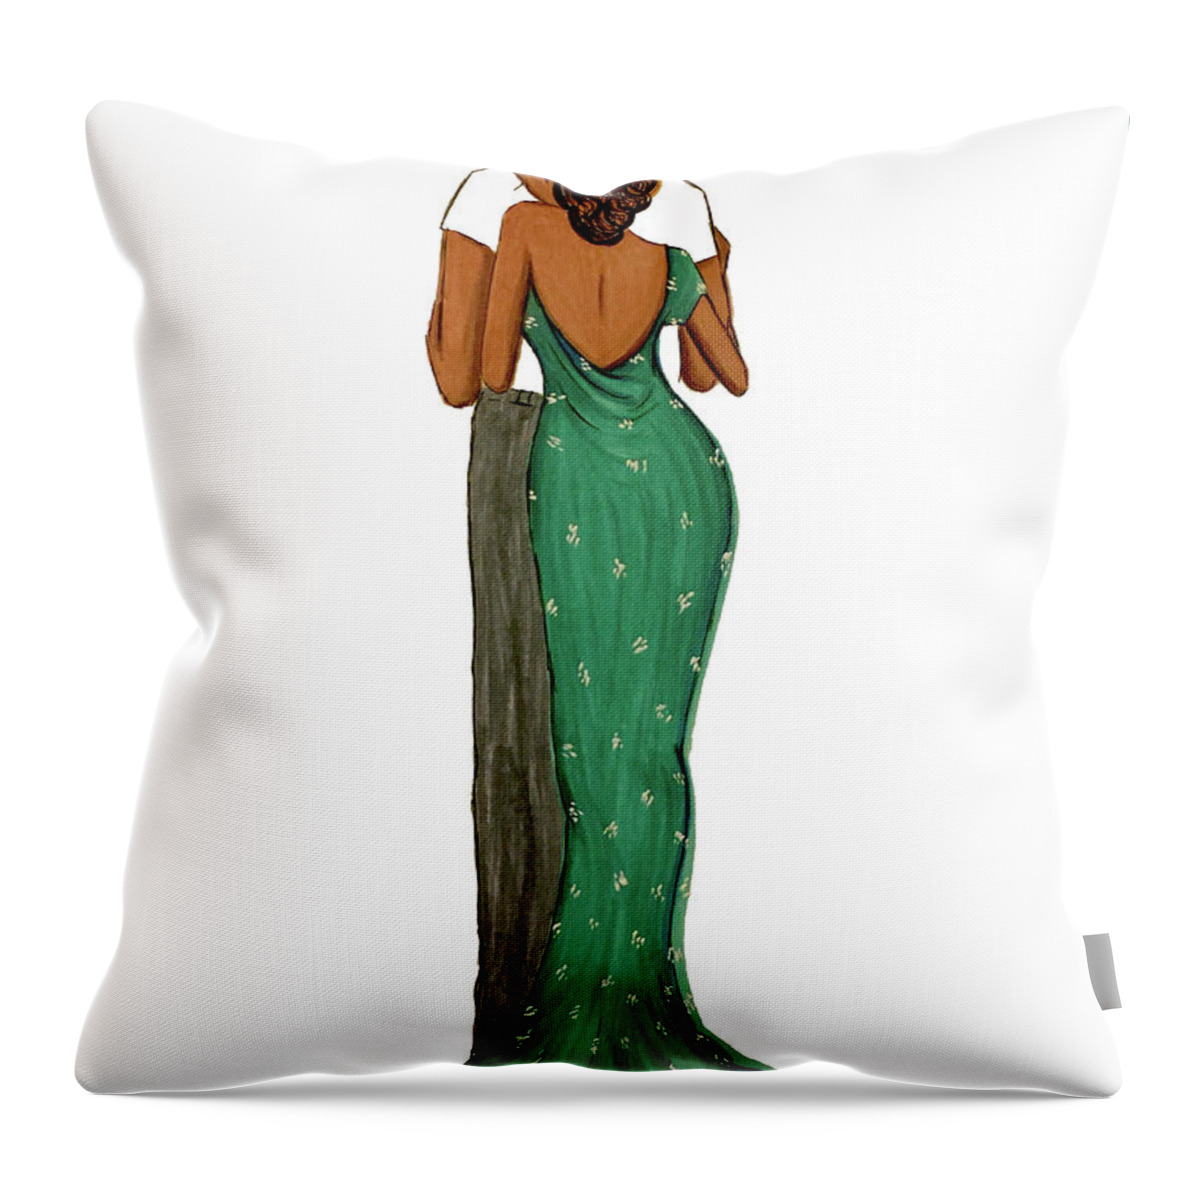 Fashion Illustration Throw Pillow featuring the mixed media Never Let Go by Yolanda Holmon